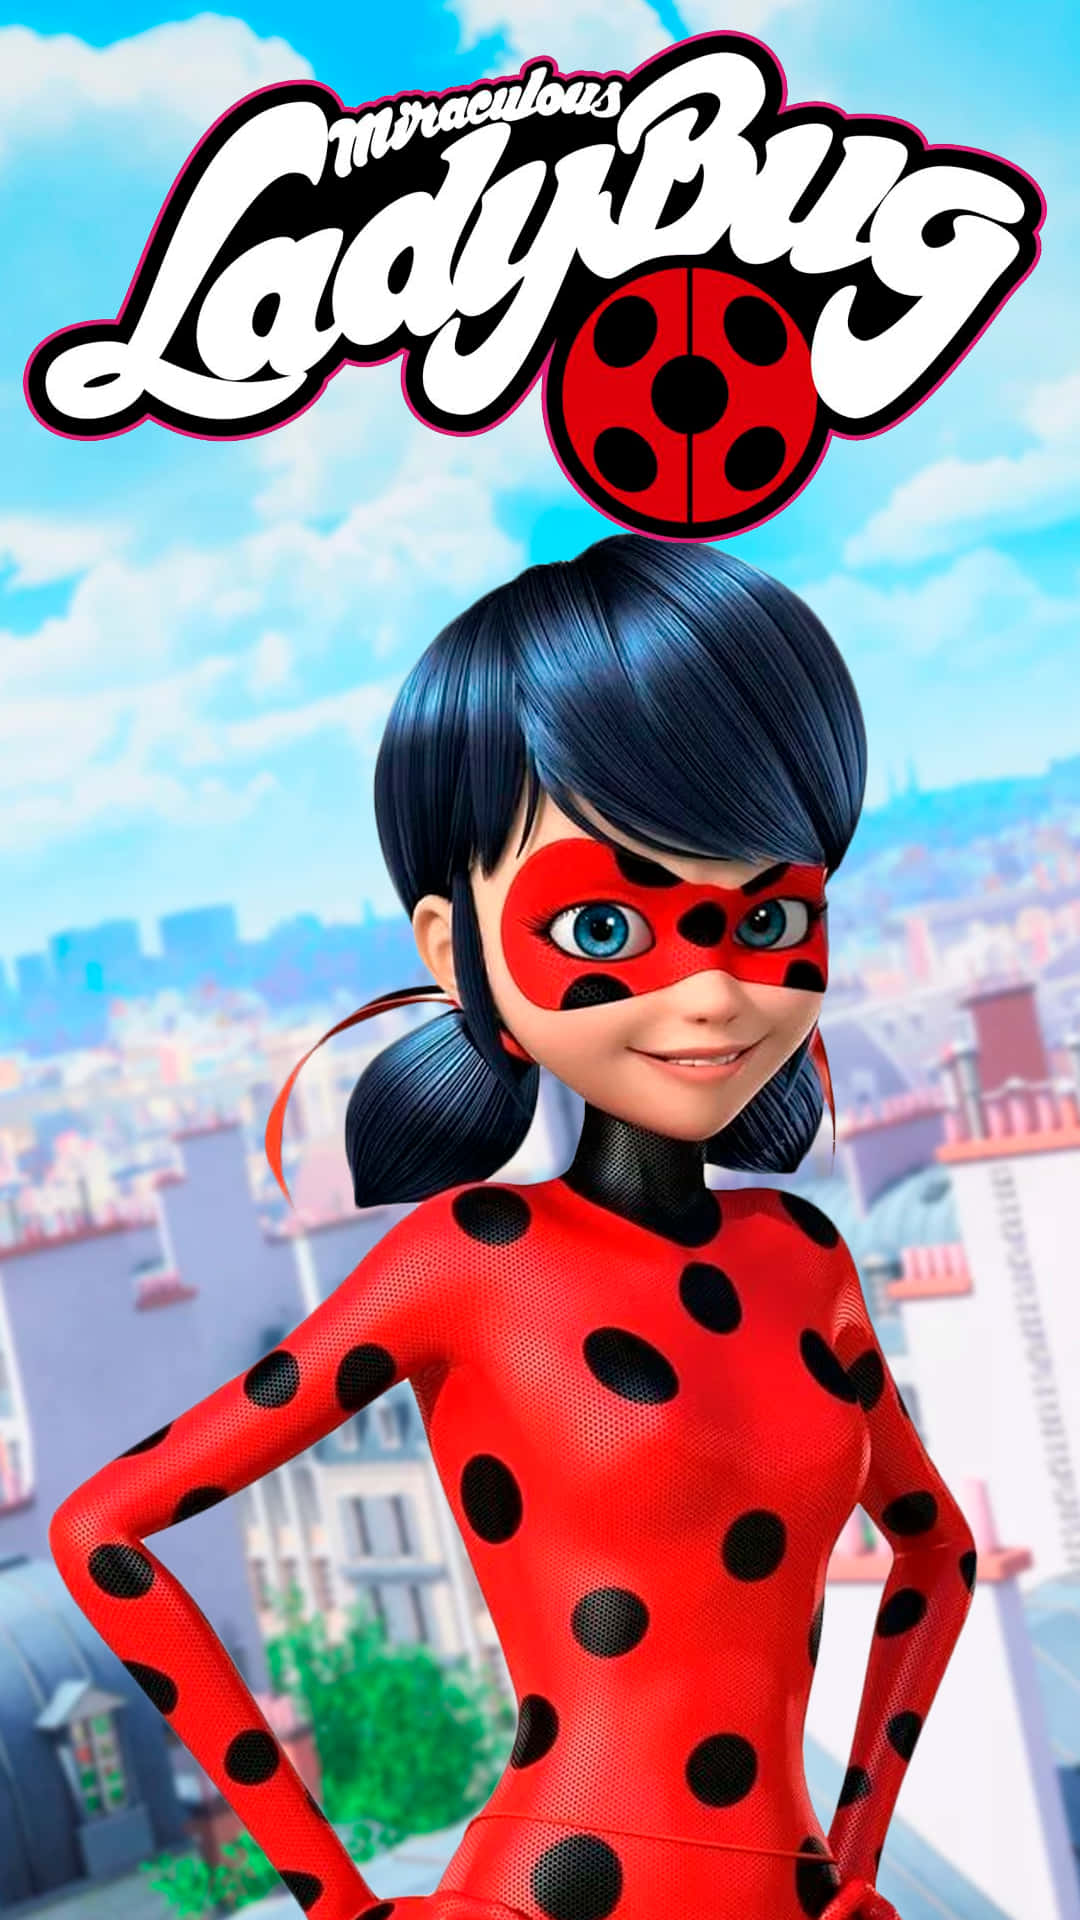 Ladybug soars to battle evil forces with the help of Cat Noir